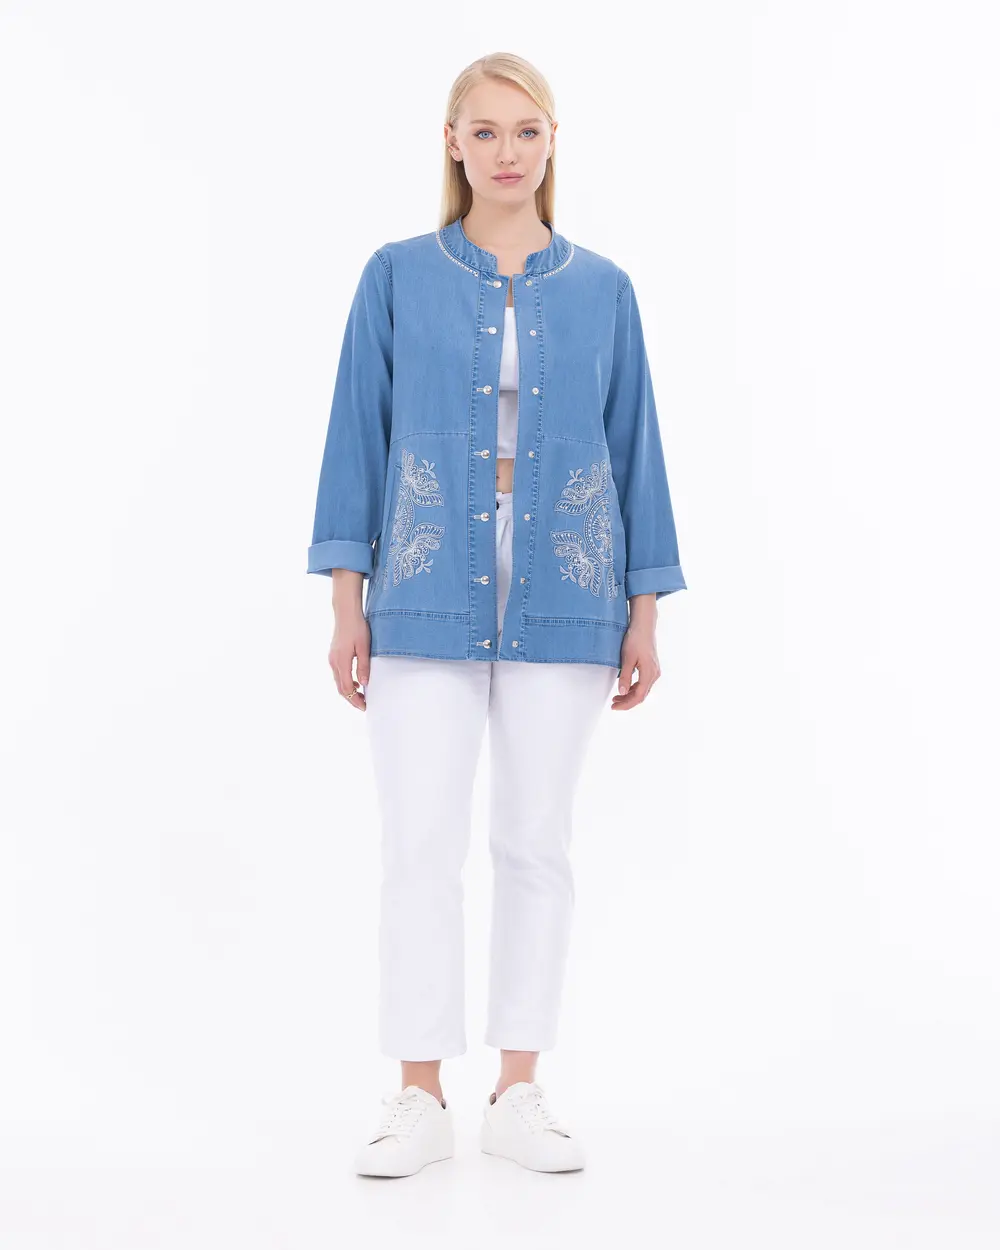 Plus Size Embroidered Round Collar Jean Jacket